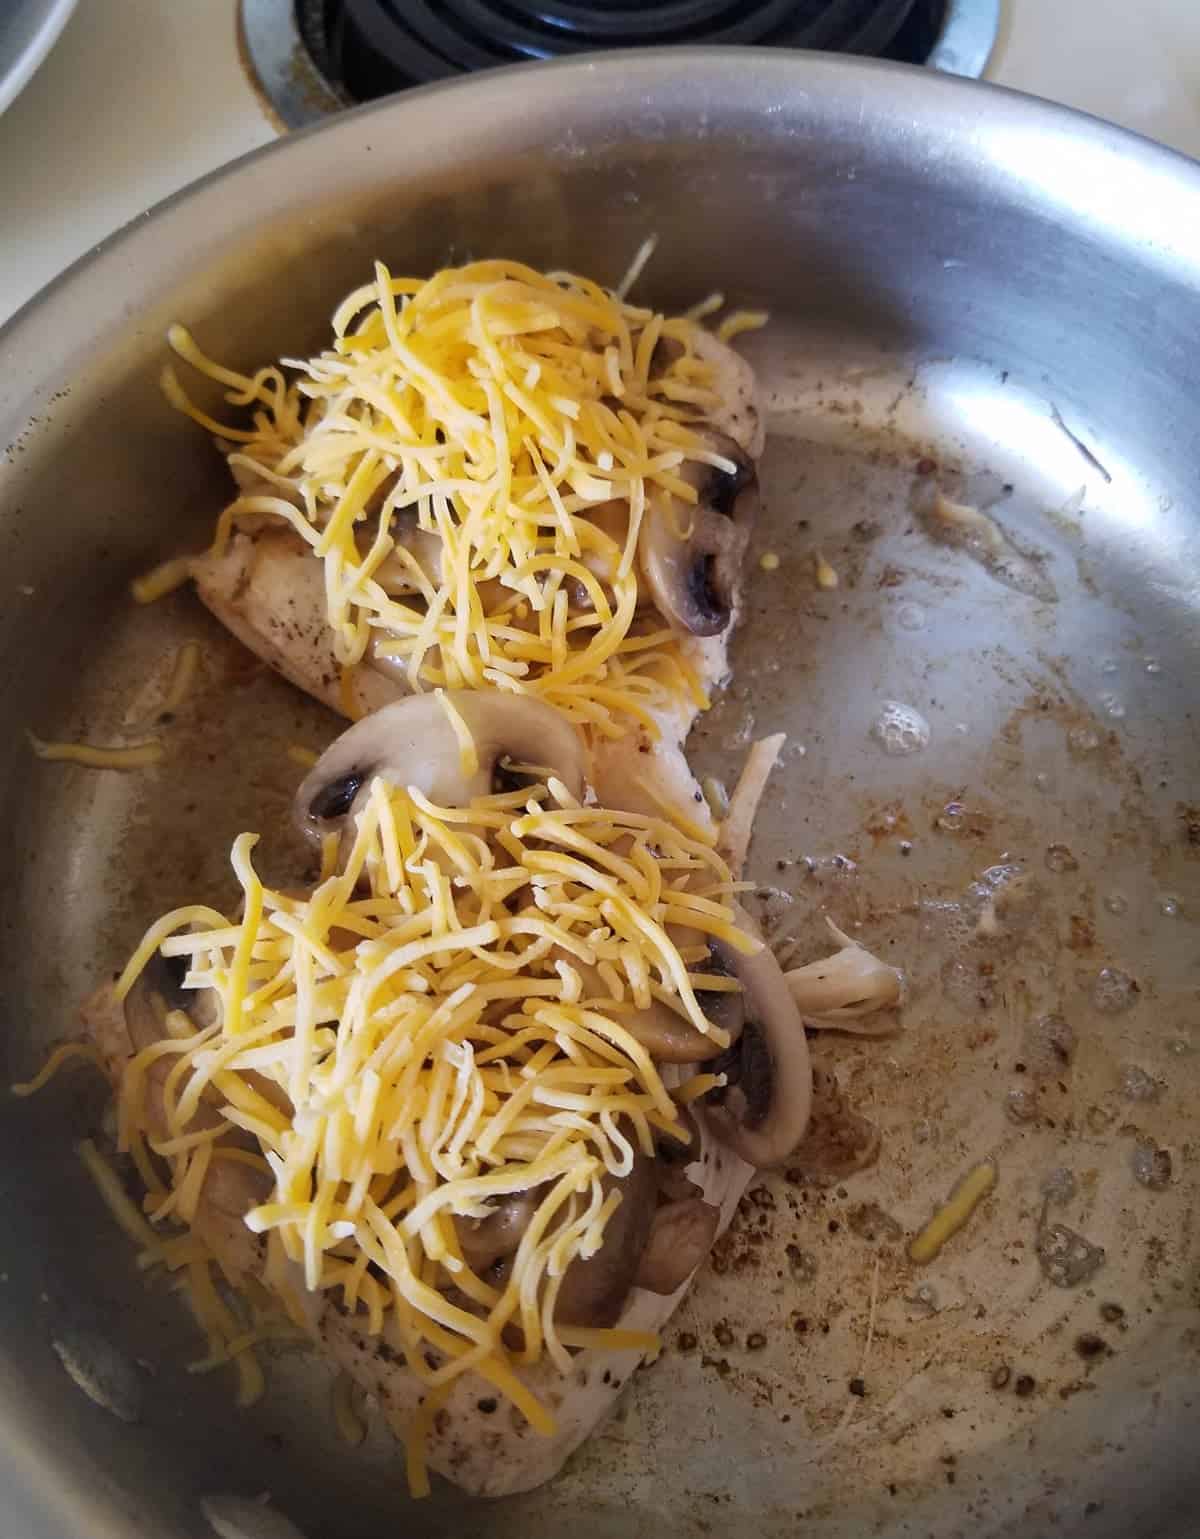 Chicken breasts topped with mushrooms and shredded cheese in saute pan.